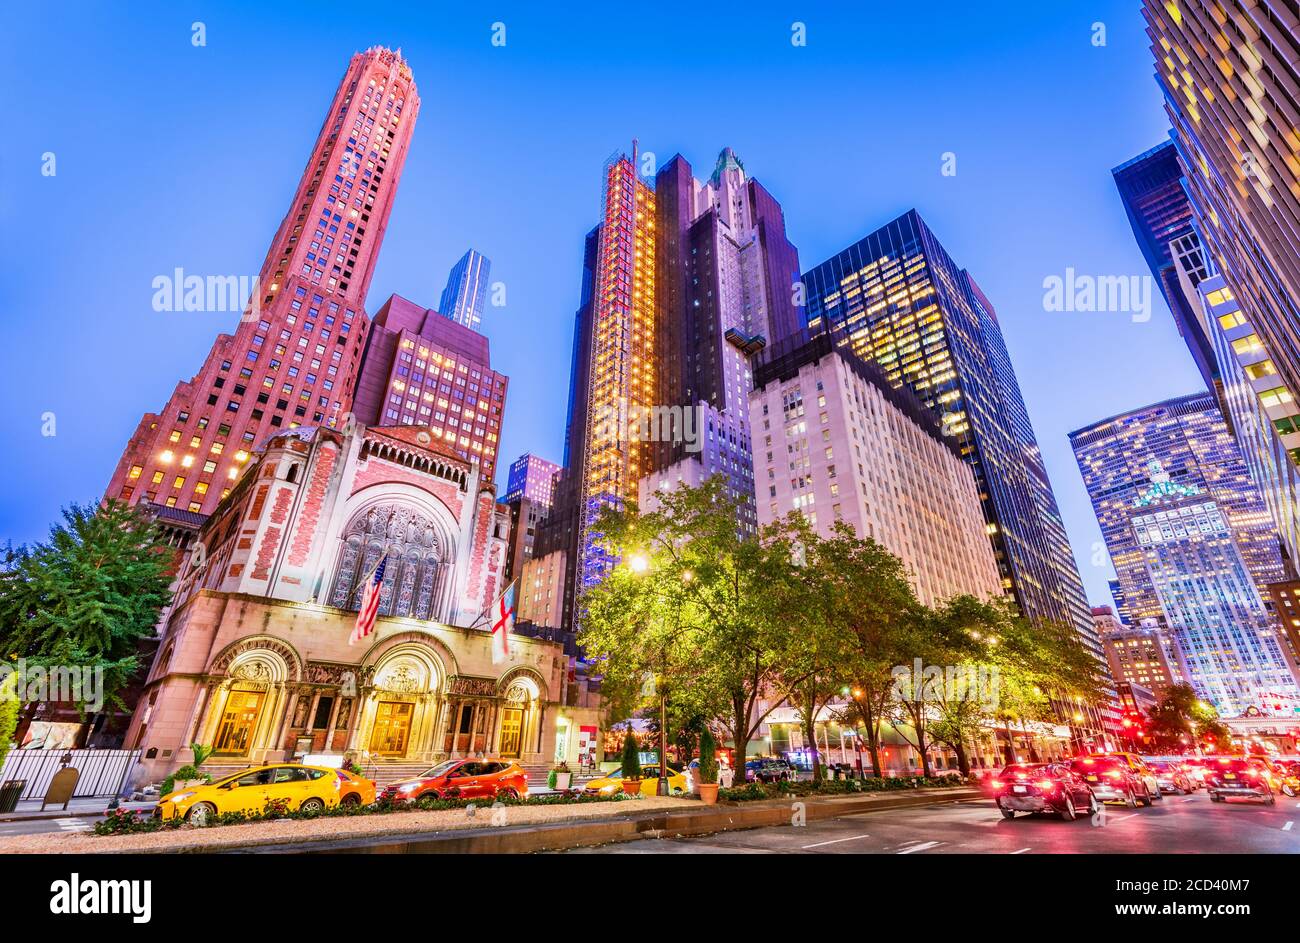 New York, USA - September 2019: Famous 5th Avenue in Manhattan, New York City in United States of America Stock Photo